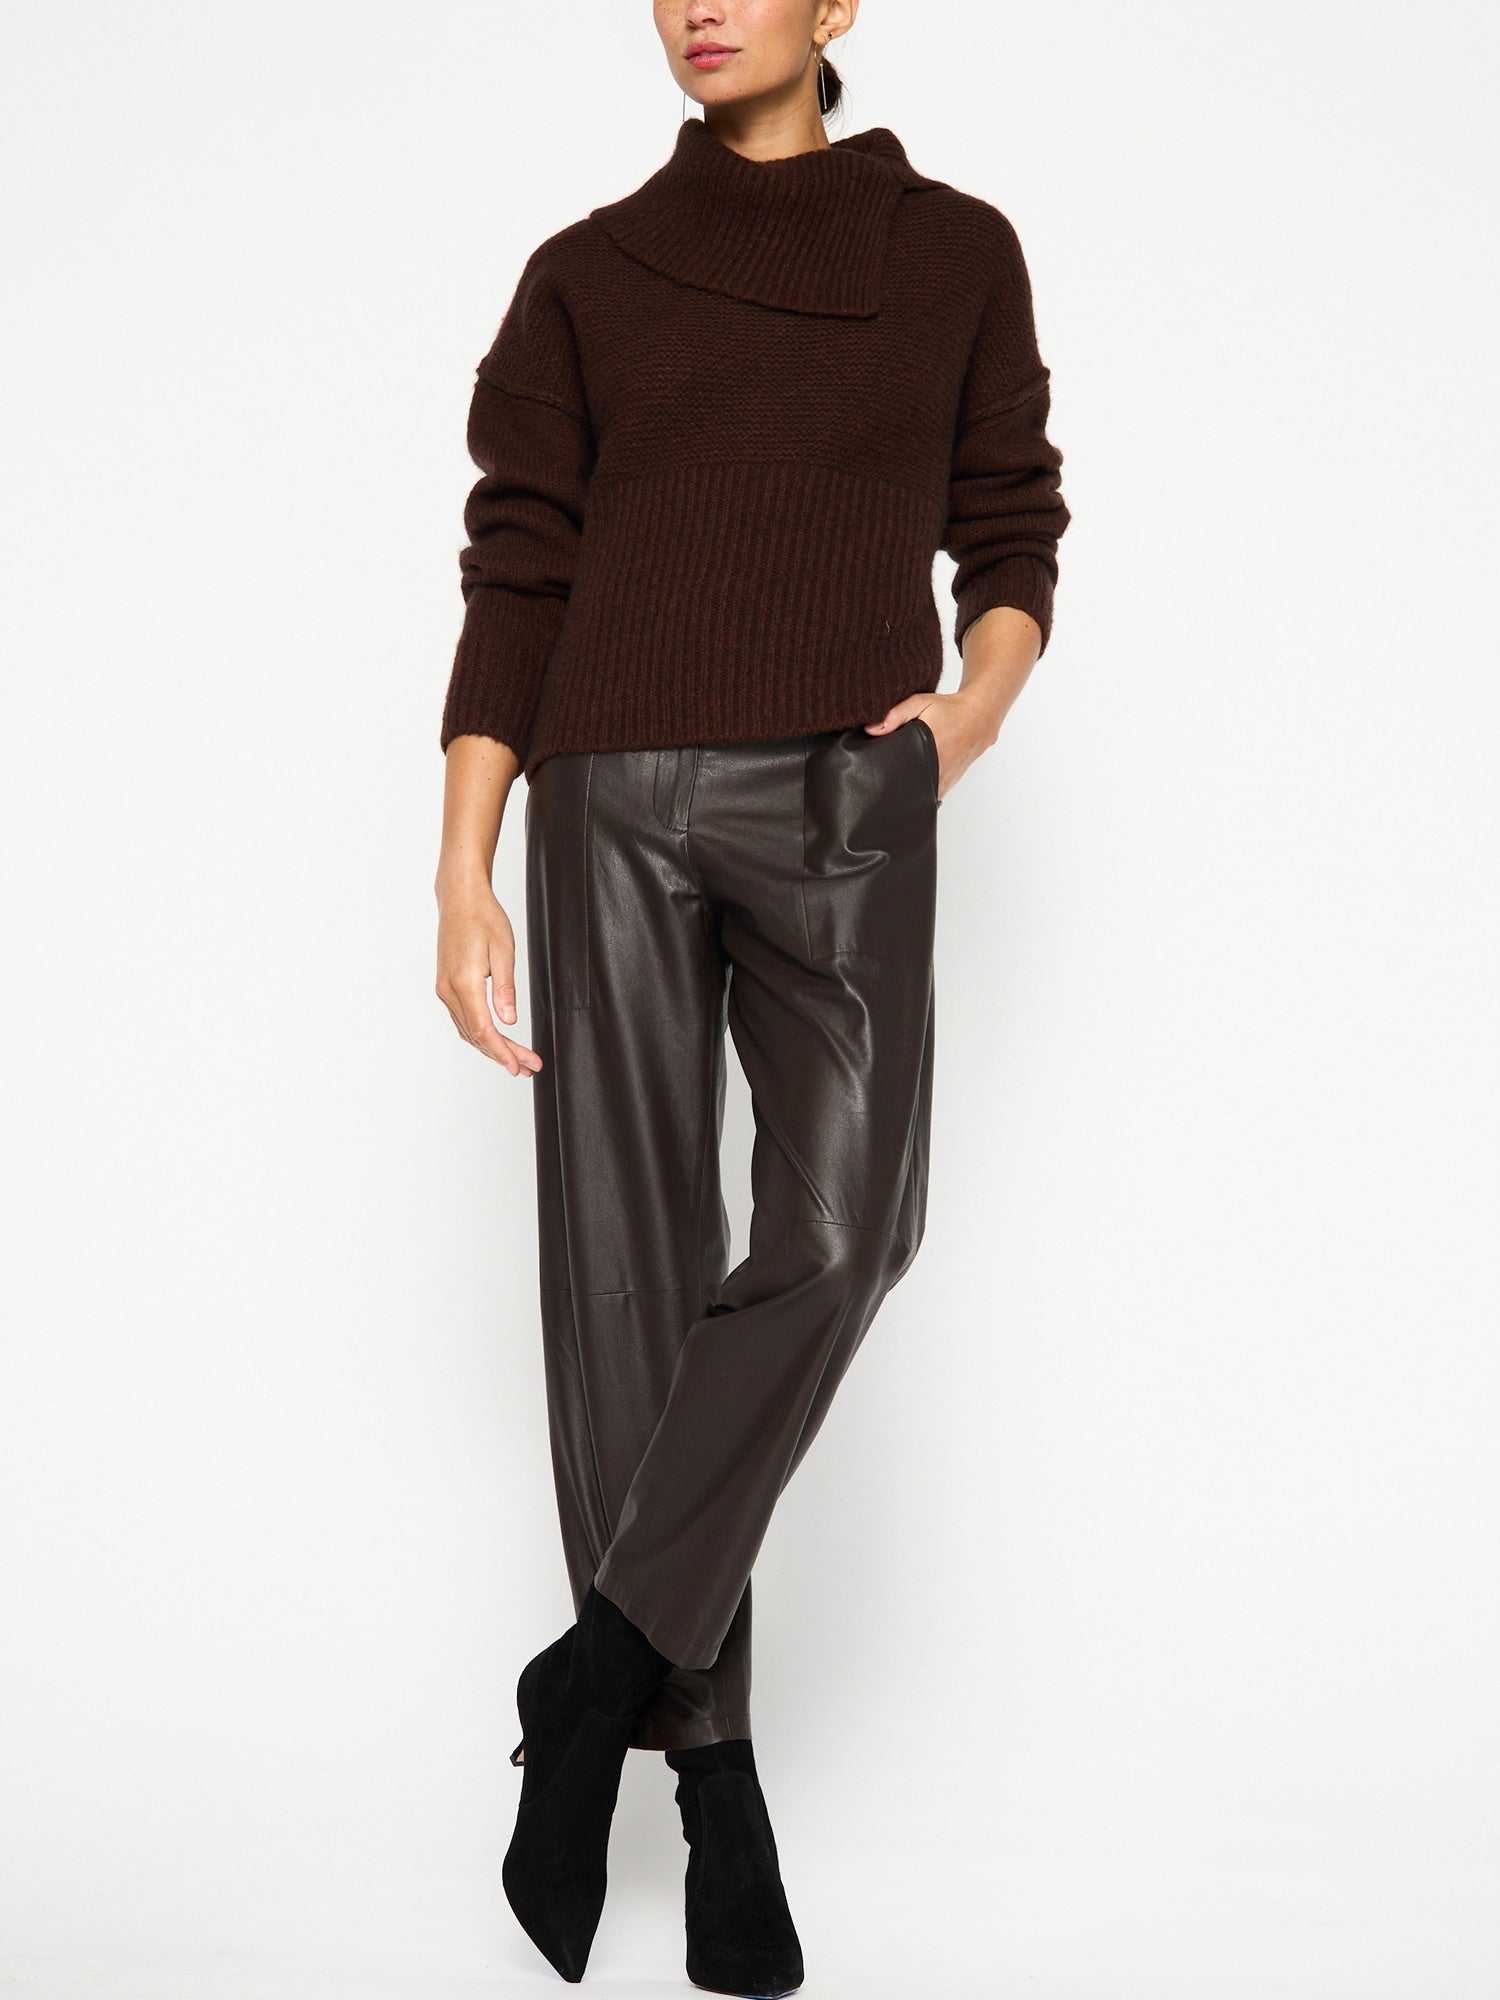 Elian overlap cowlneck wool cashmere brown sweater full view